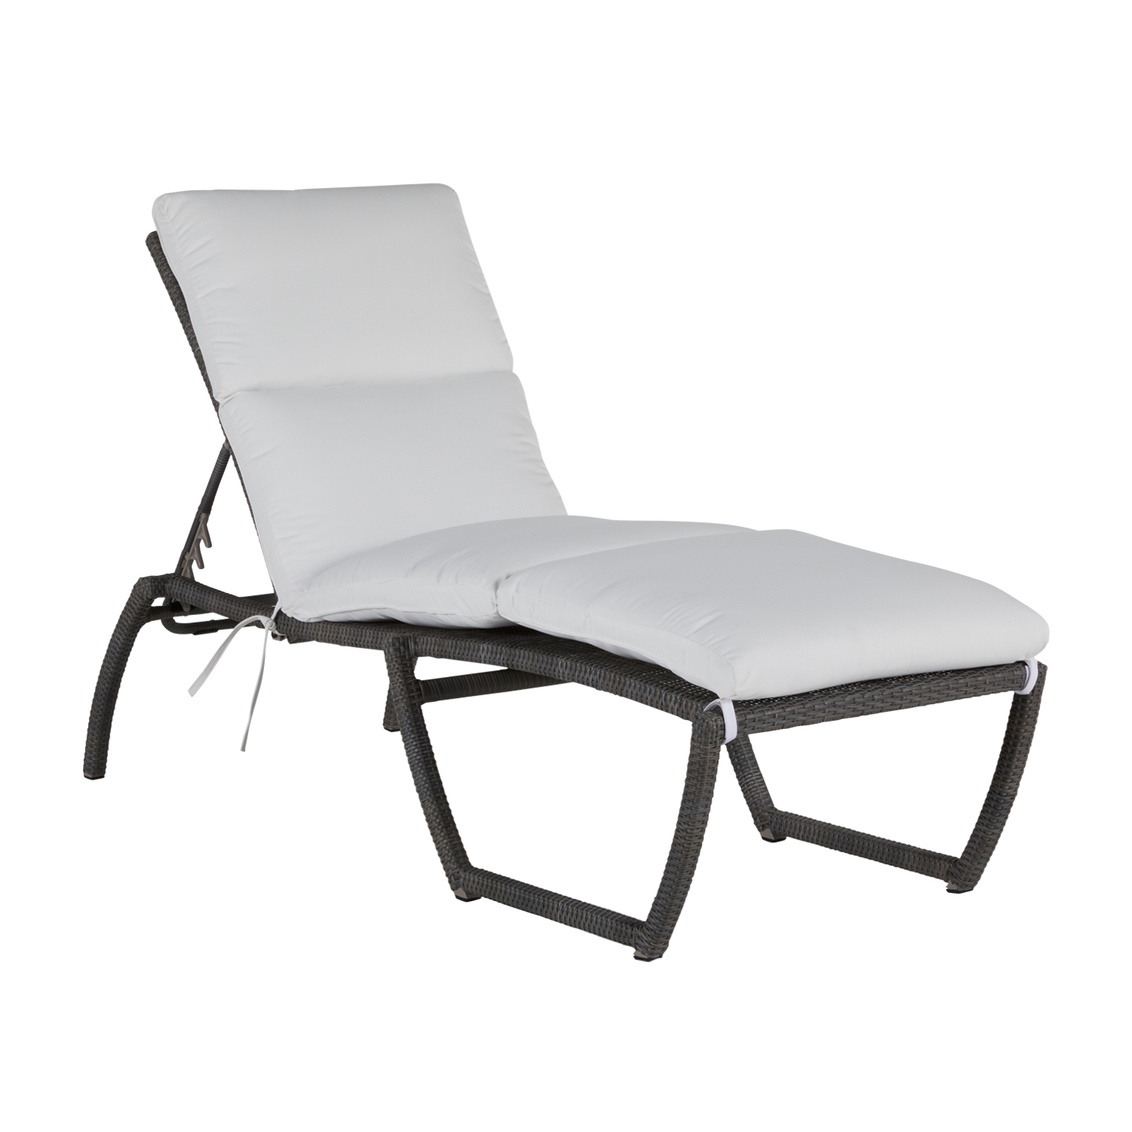 skye chaise lounge in slate grey – frame only product image